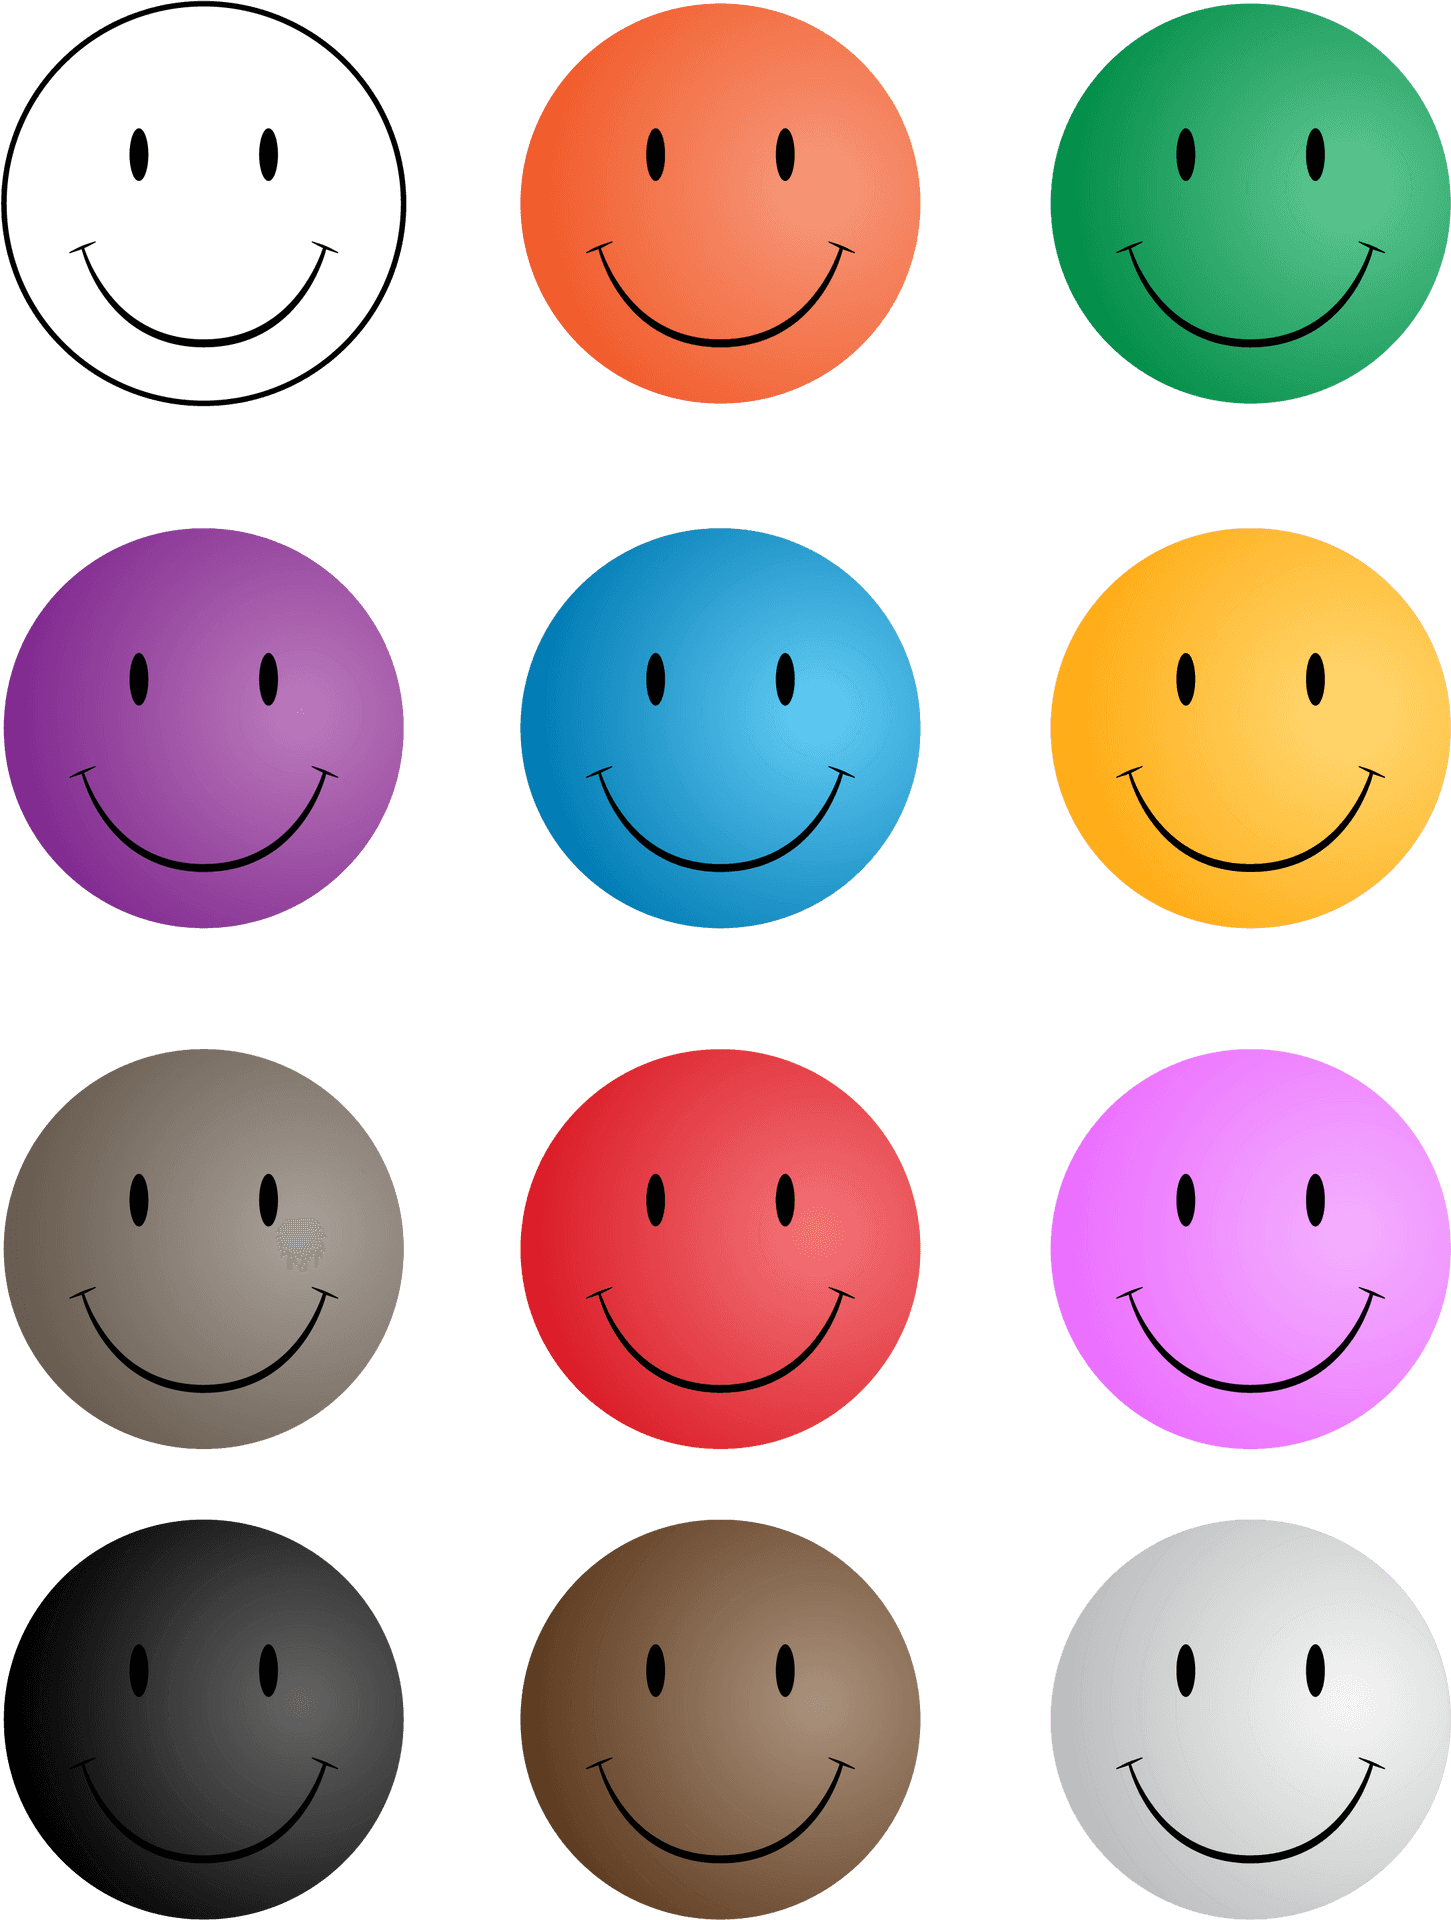 Colorful Smiley Faces Array PNG image